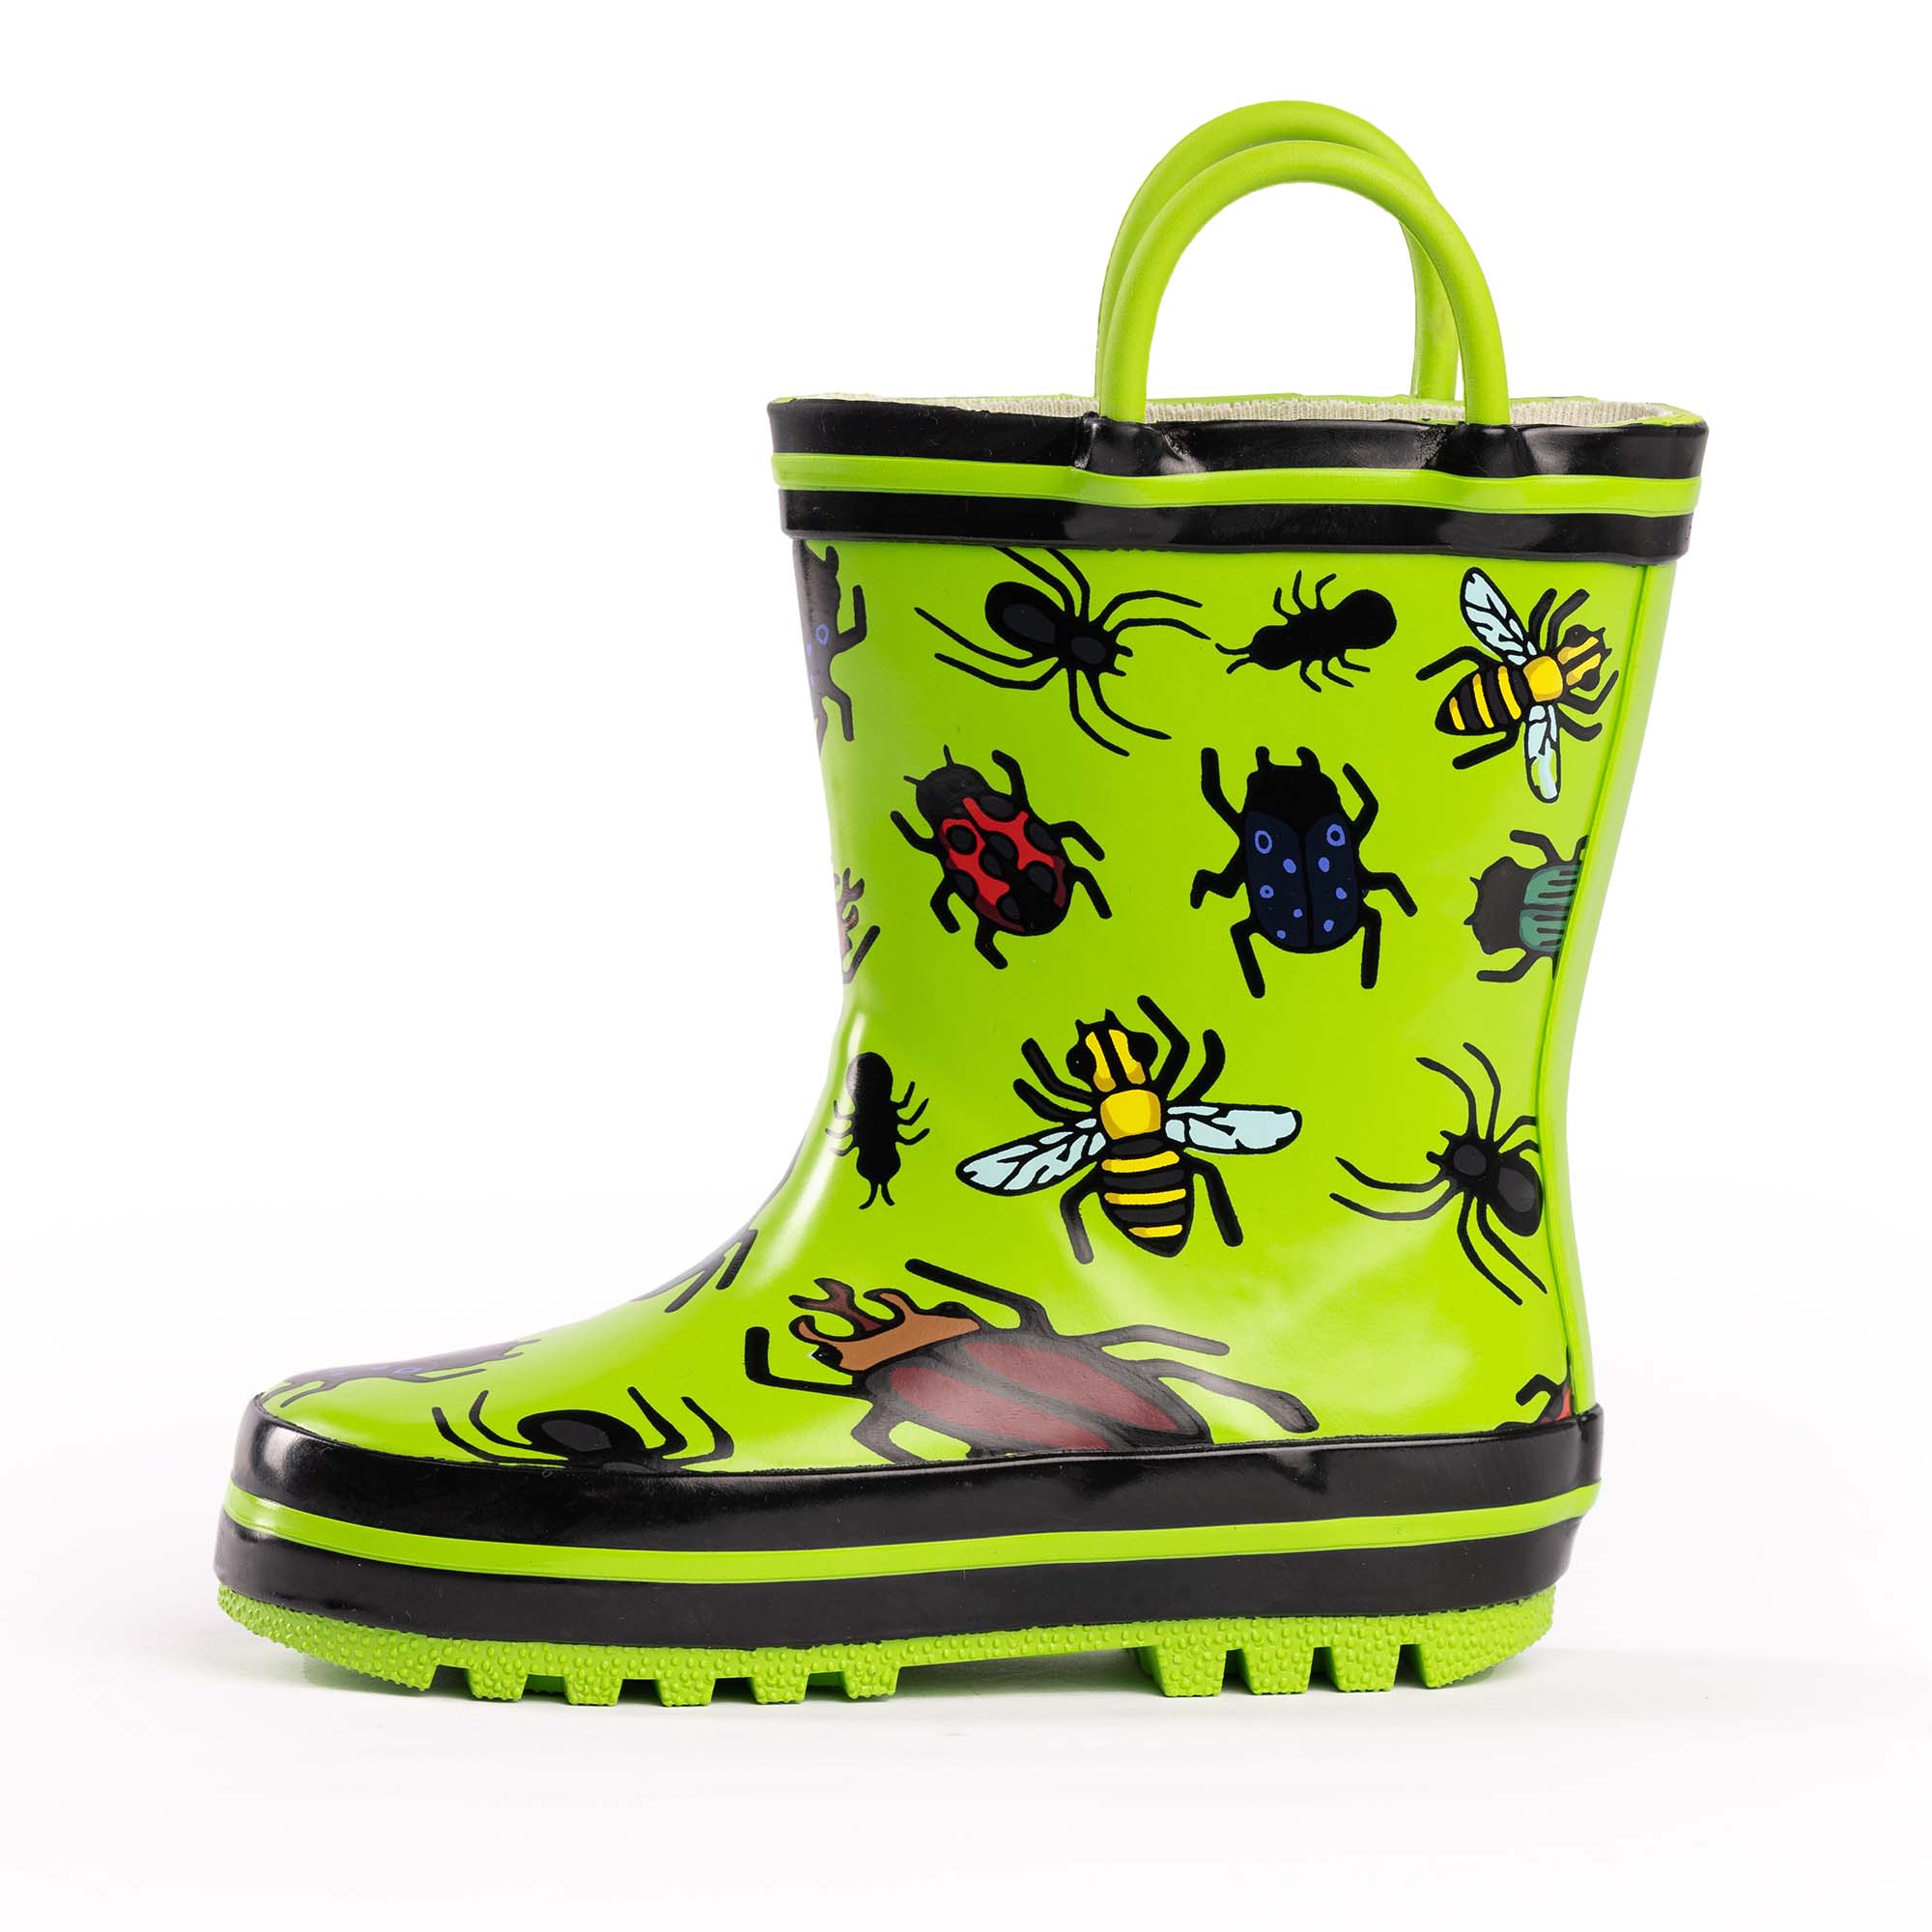 NORTY Waterproof Rubber Rain Boots for Kids Boys and Girls Solid & Printed Rainboots for Toddlers and Kids 